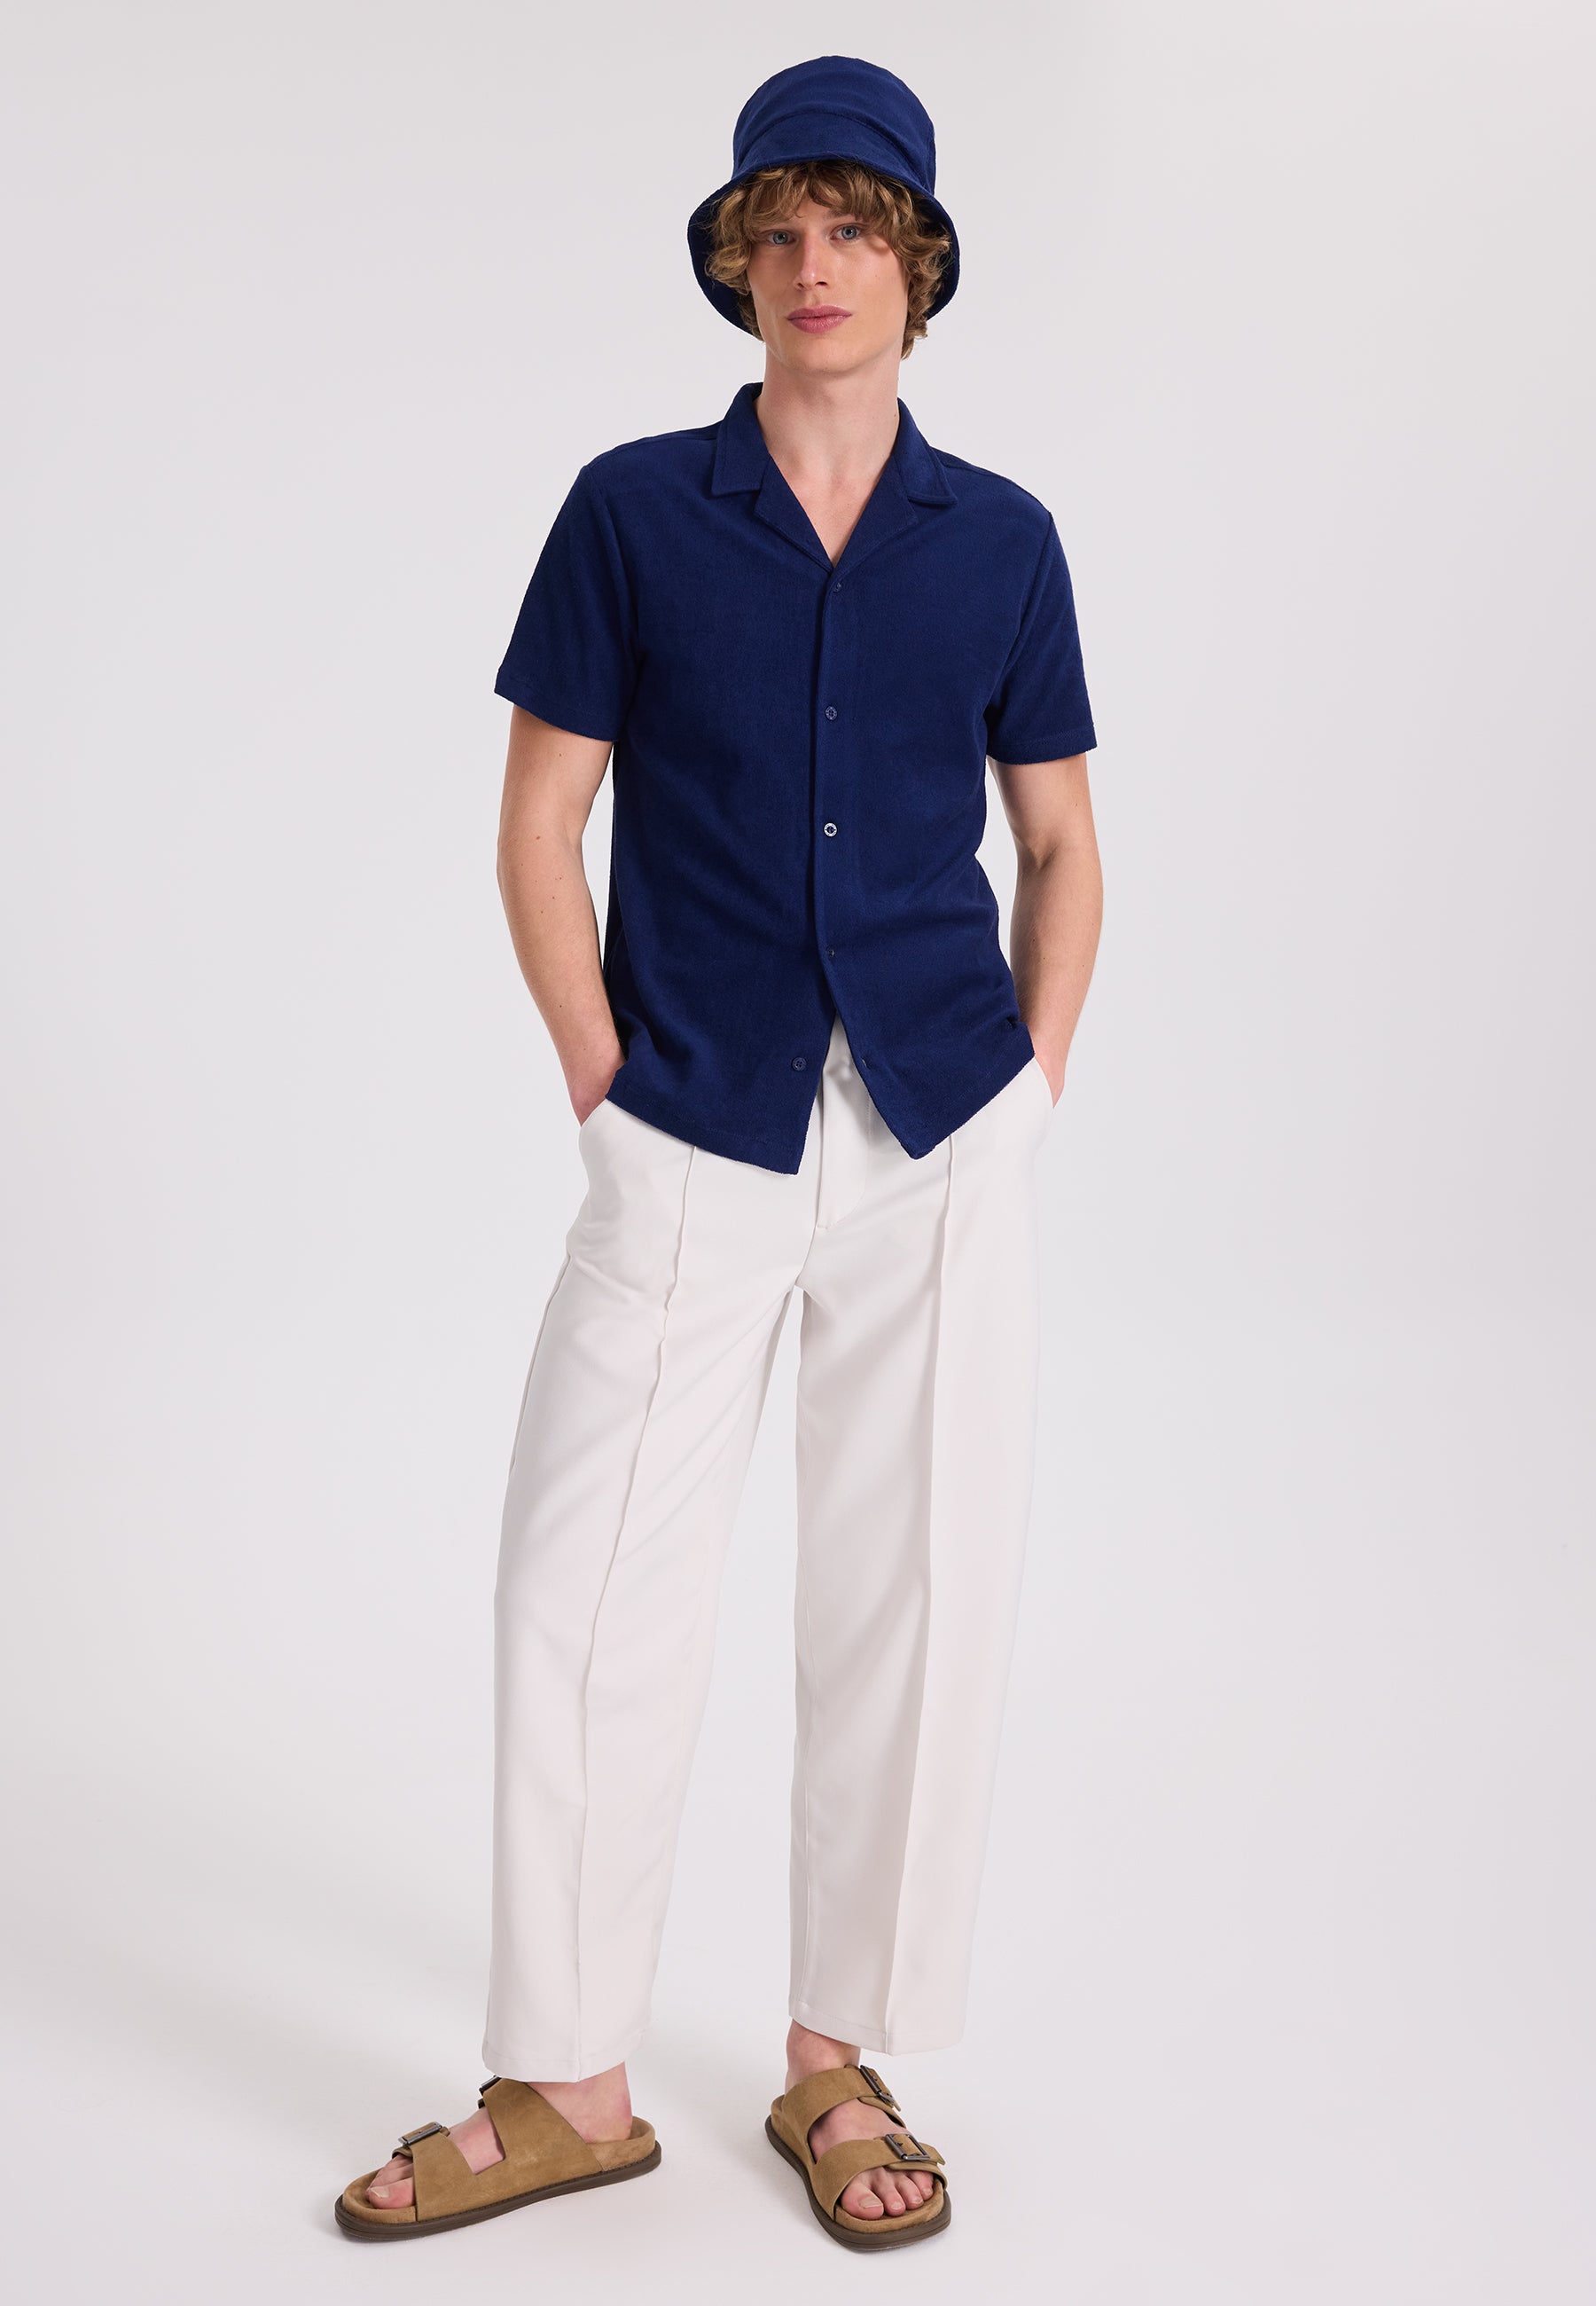 BREEZE TERRY TOWELLING S/S SHIRT in Naval Academy